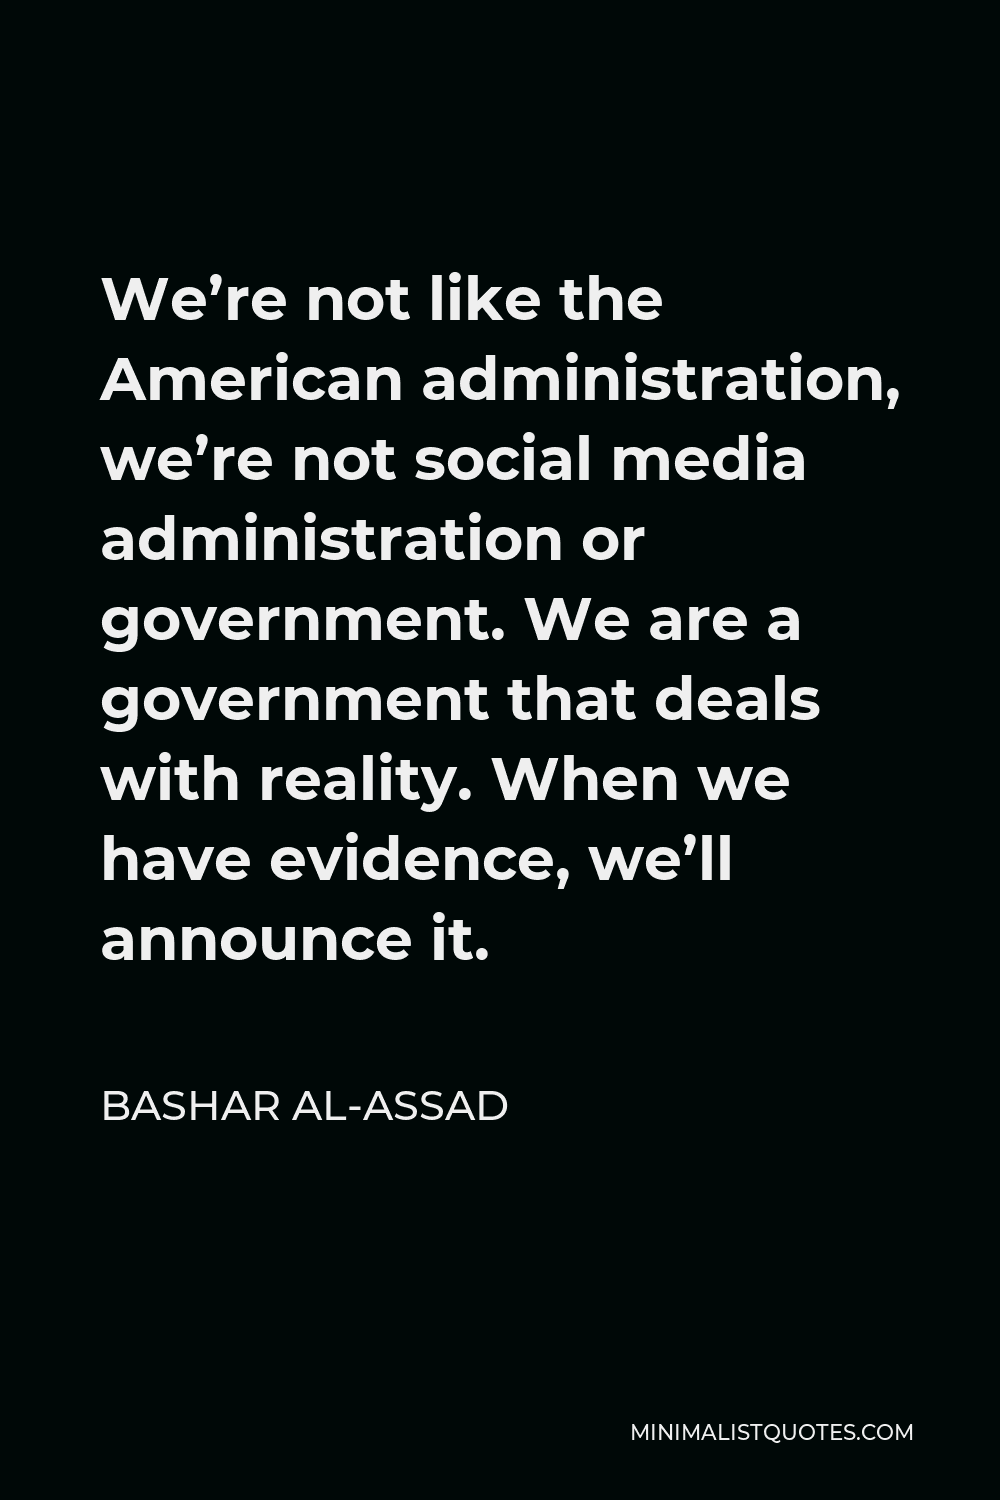 Bashar al-Assad Quote - We’re not like the American administration, we’re not social media administration or government. We are a government that deals with reality. When we have evidence, we’ll announce it.